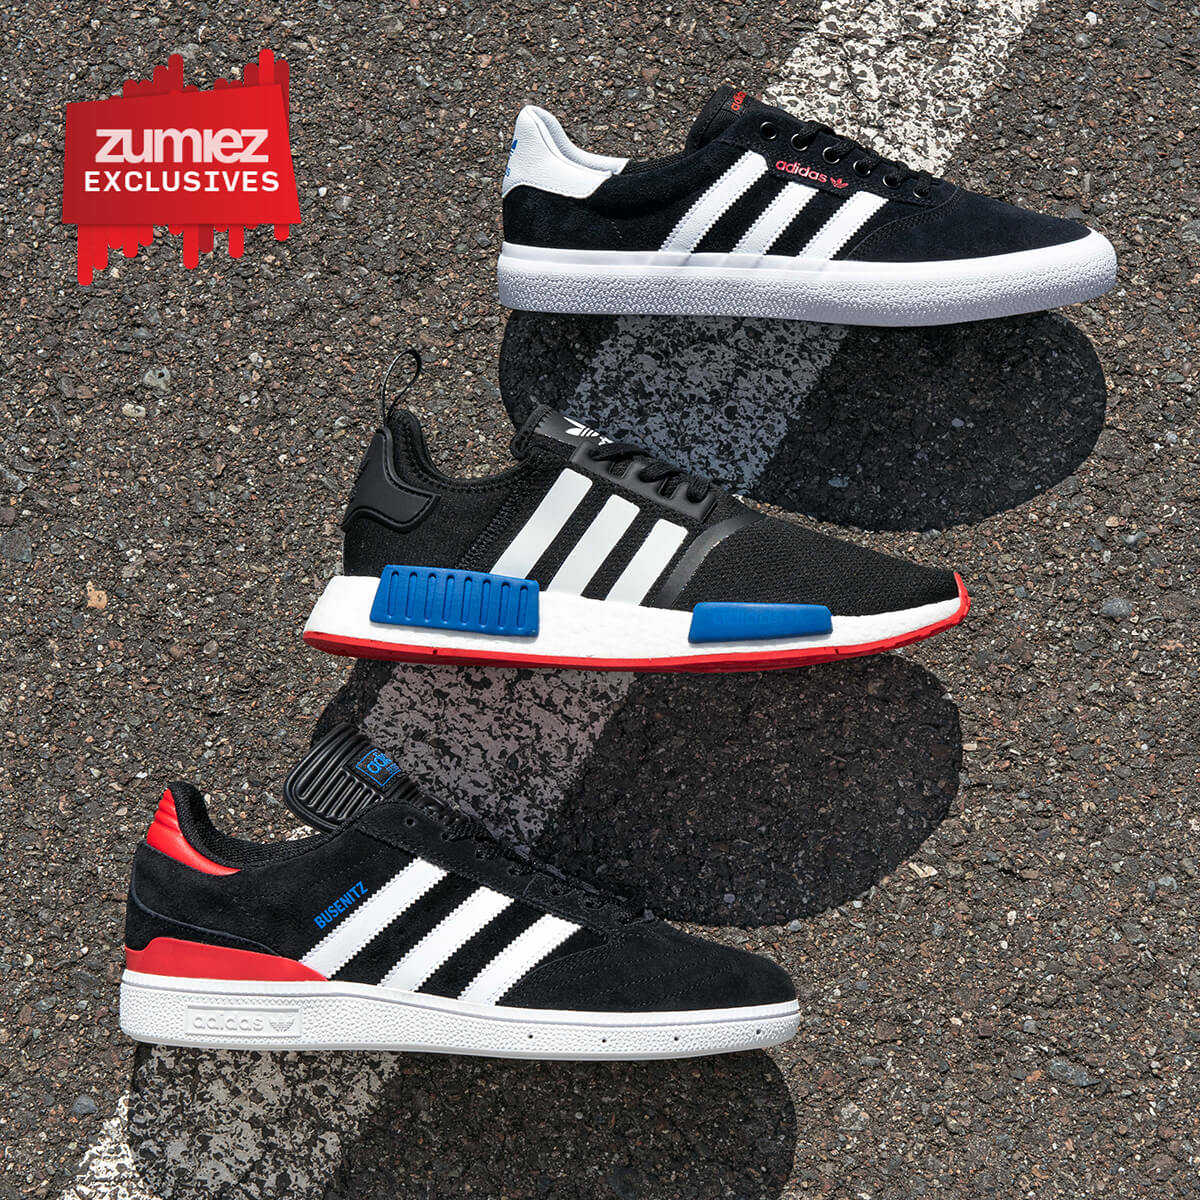 NEW ARRIVAL ADIDAS FOOTWEAR - SHOP NEW SHOES